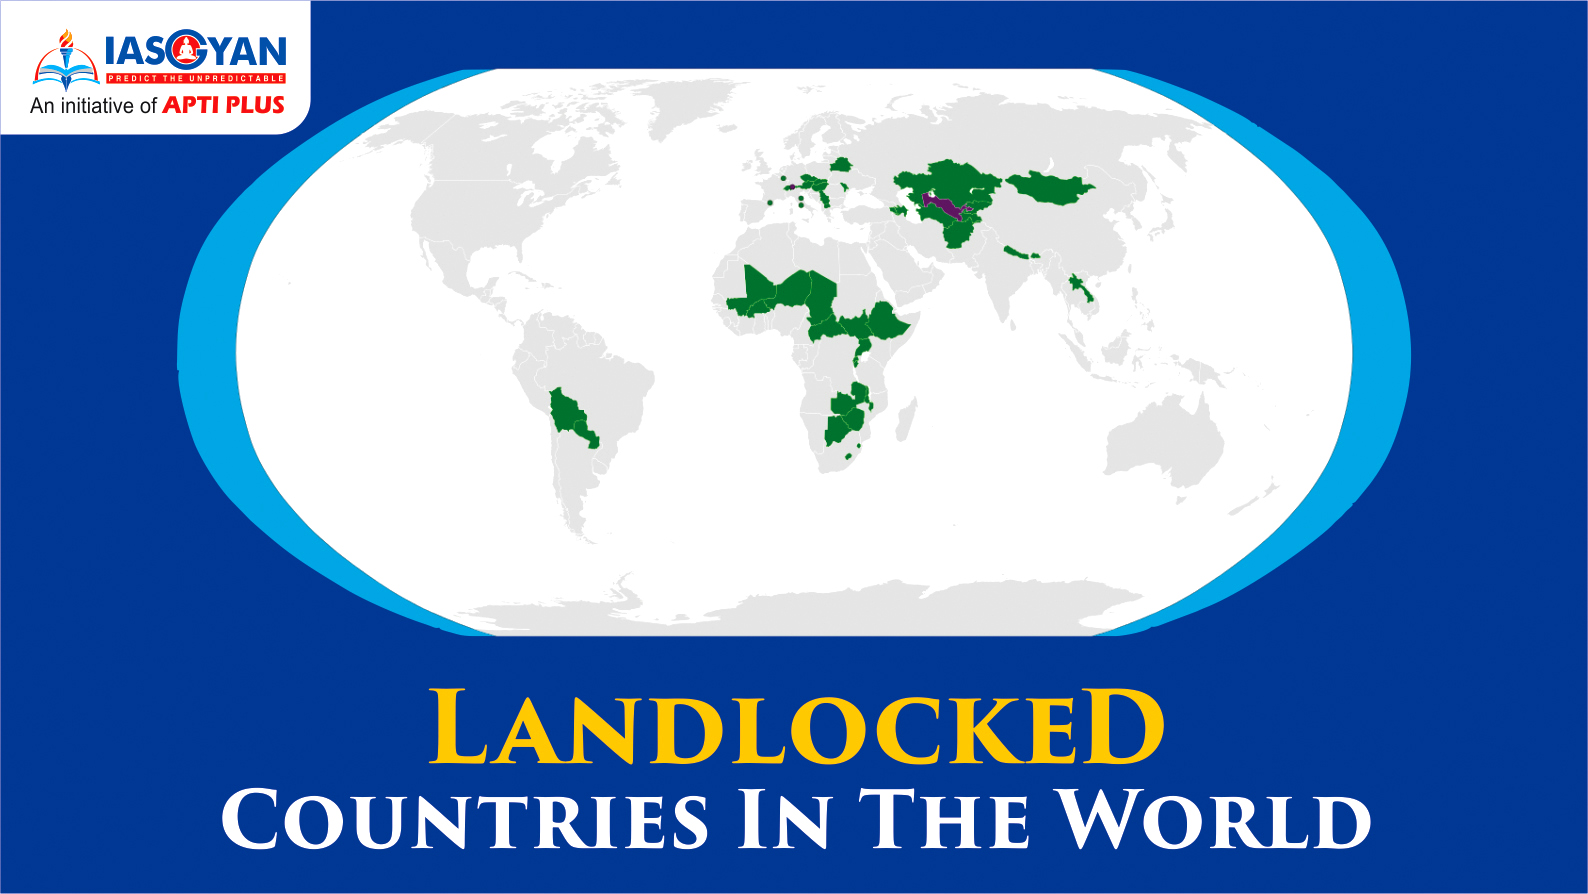 LANDLOCKED COUNTRIES IN THE WORLD